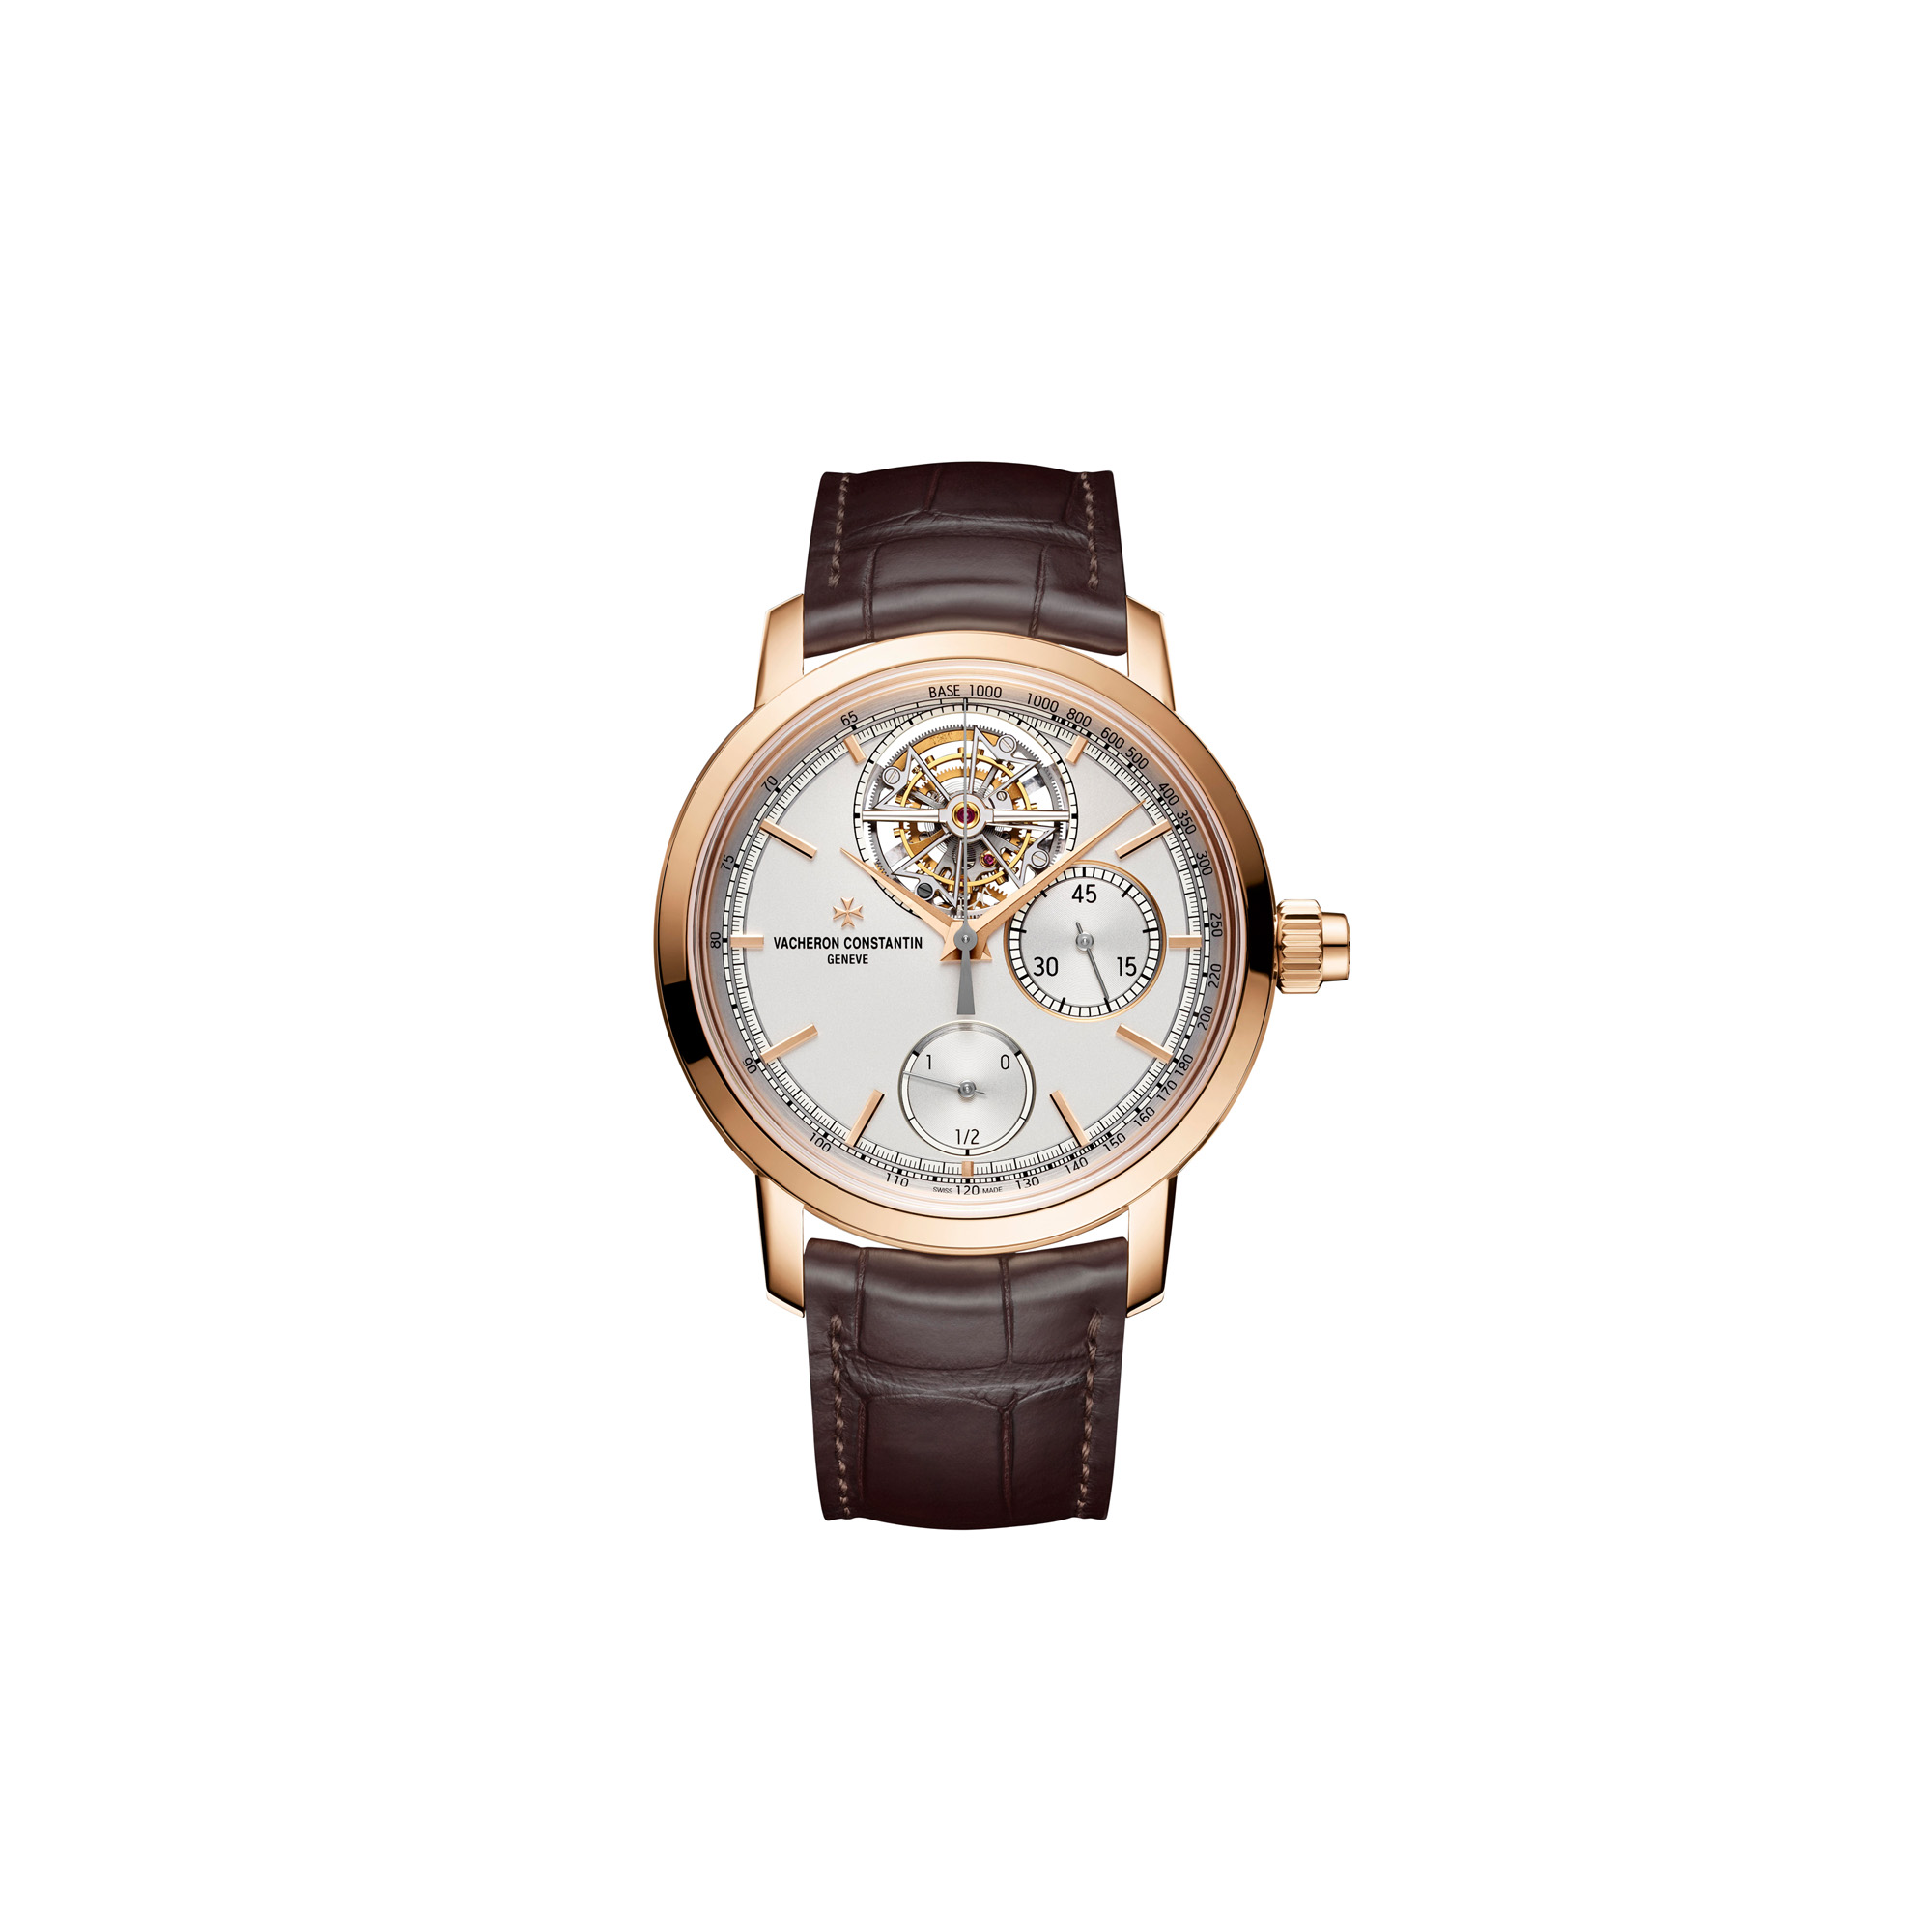 Vacheron Constantin Vladimir is touted to be the most complicated  wristwatch in the world - Luxurylaunches